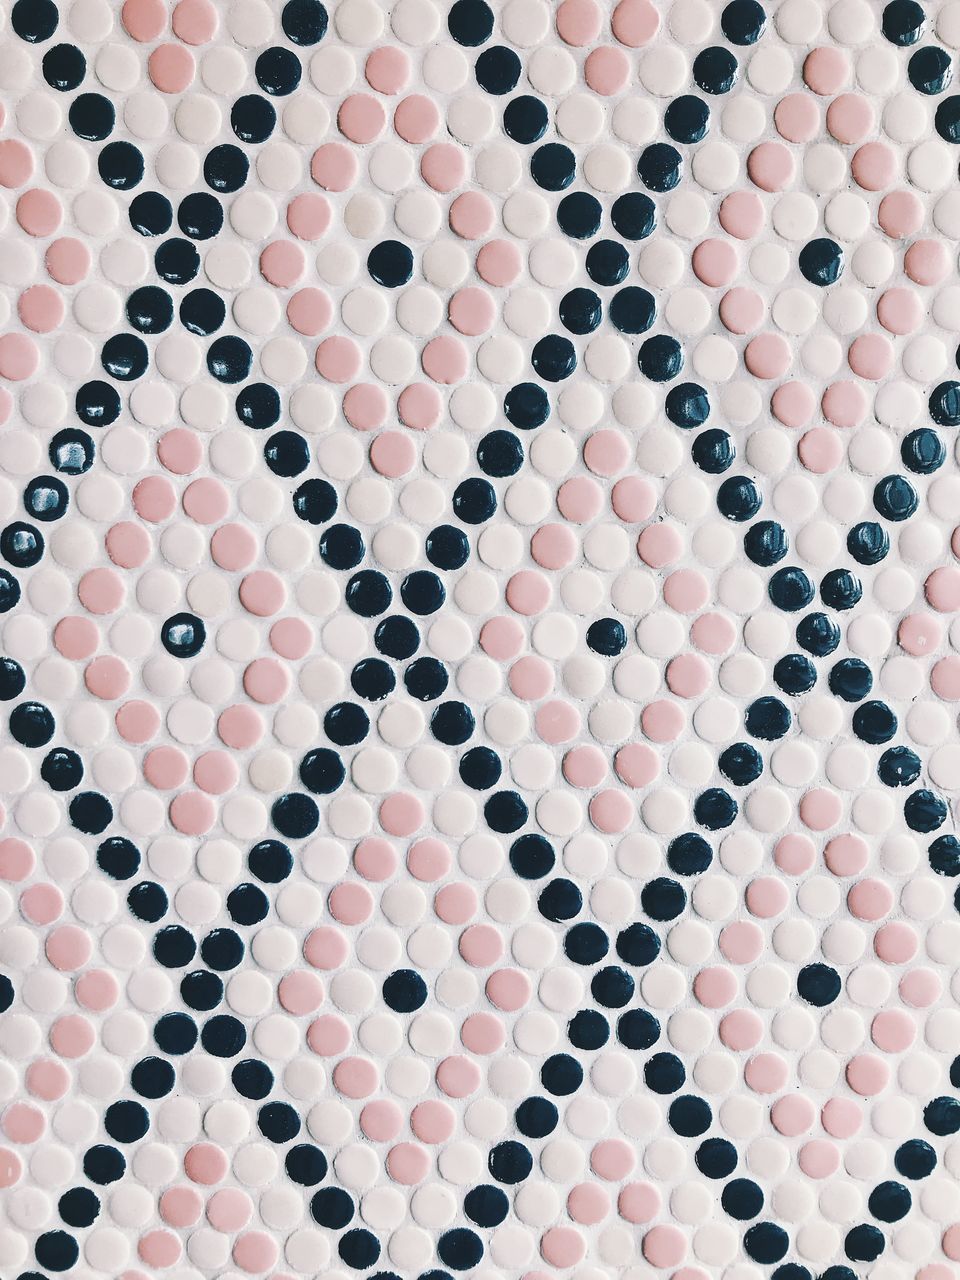 FULL FRAME SHOT OF ABSTRACT PATTERN ON BACKGROUND